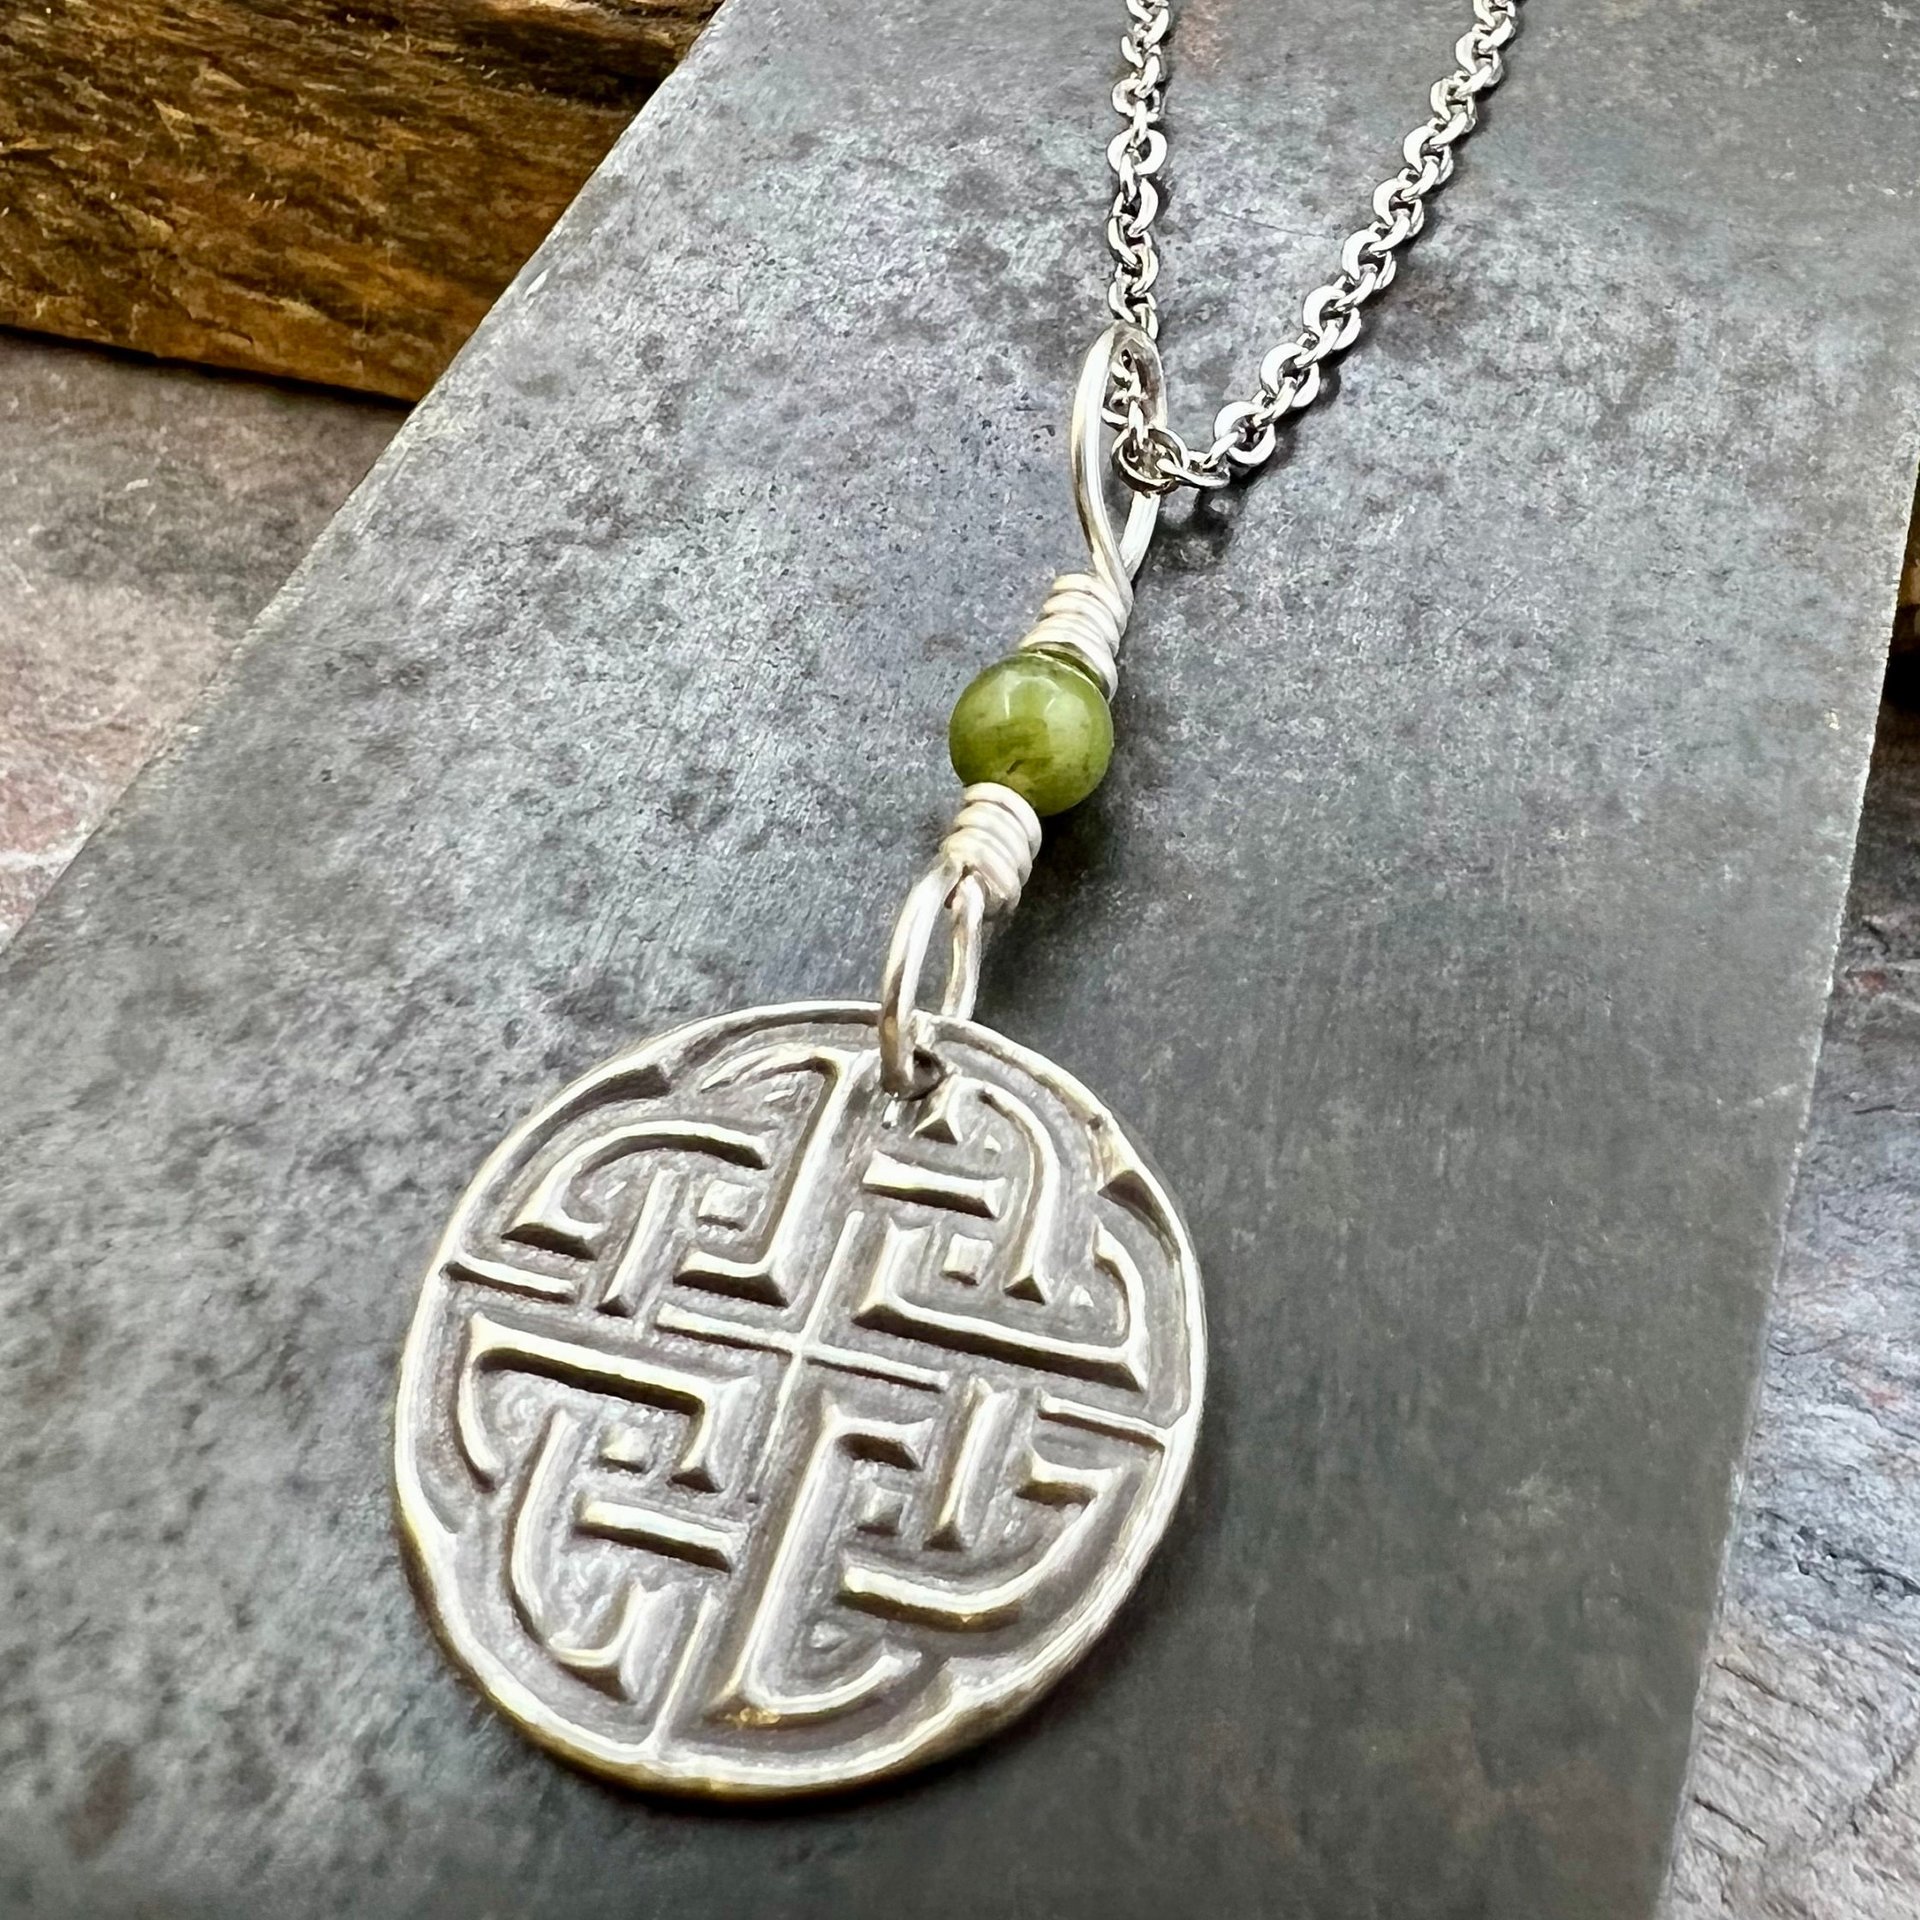 Sterling Silver, Celtic Knot Wax Seal Charm, Connemara Marble, Irish Celtic Jewelry, Pagan Art, Leather & Vegan Cords, Stainless Chains